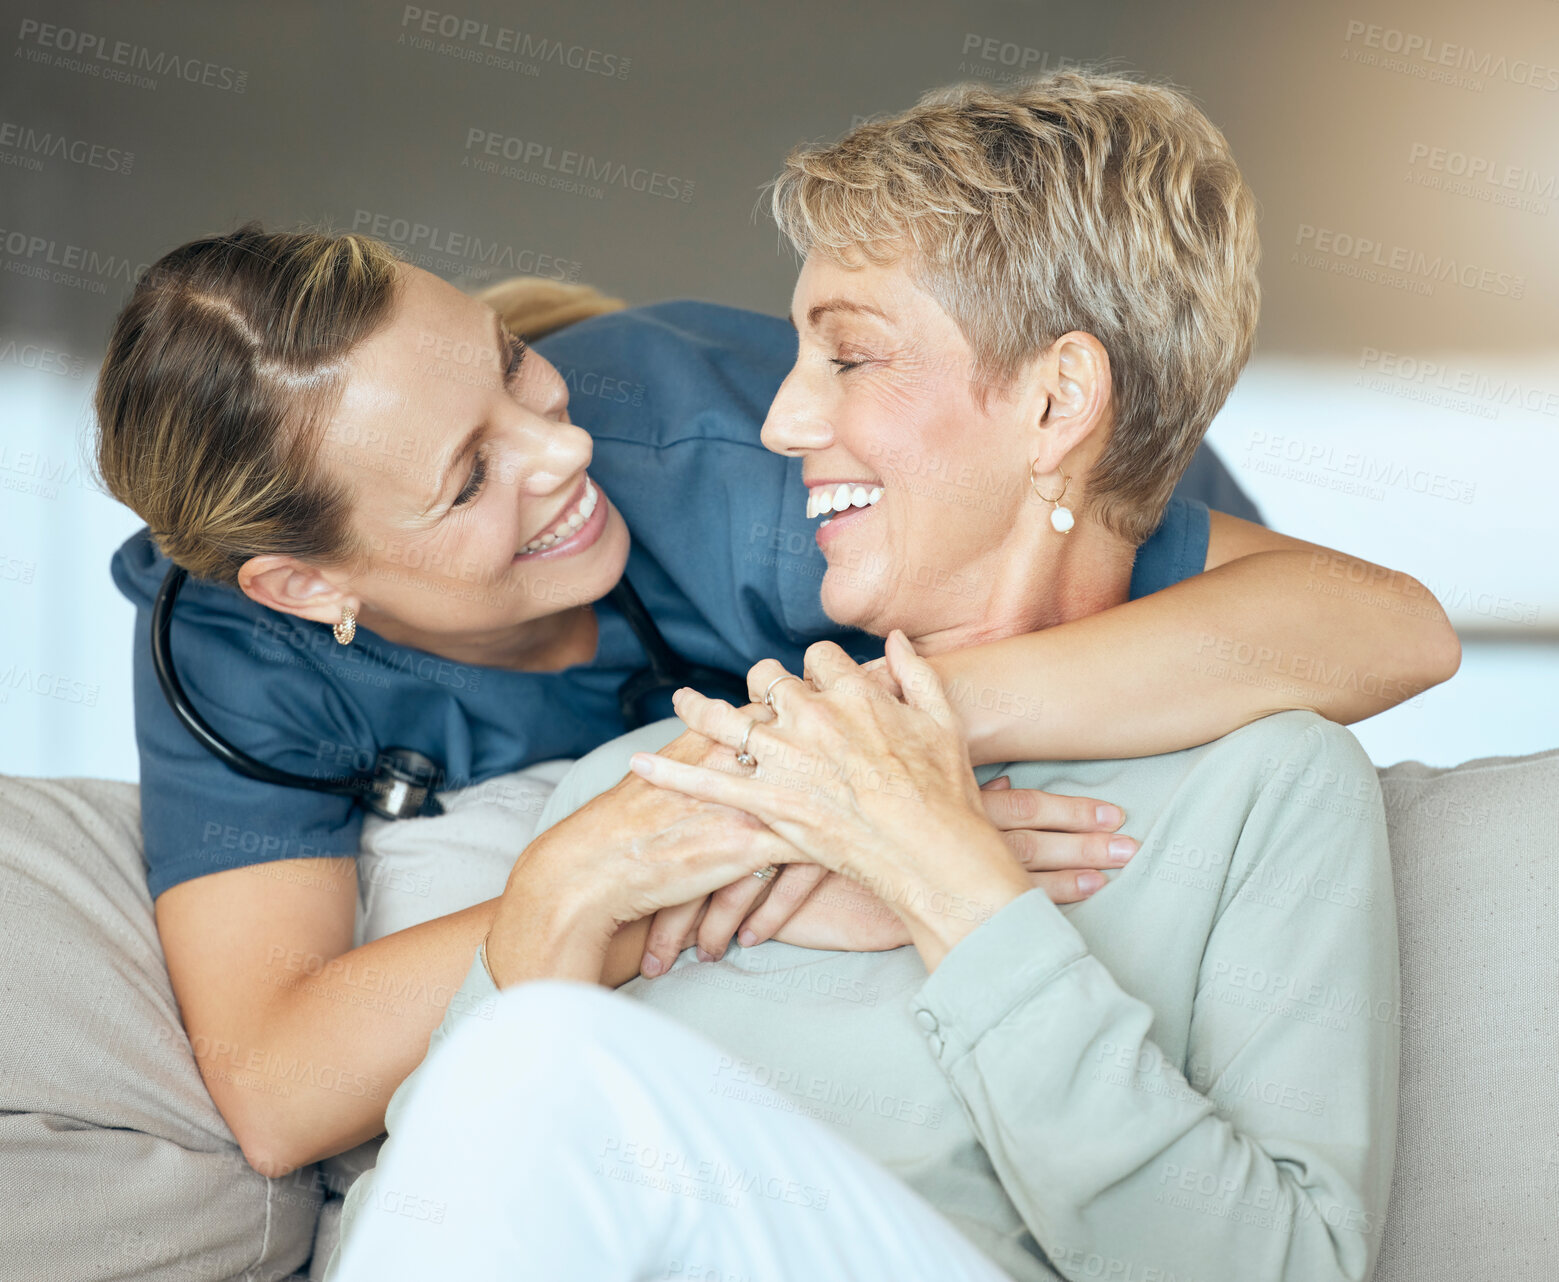 Buy stock photo Two happy smiling women only  showing the bond between patient and doctor during a checkup at home. A doctor showing support for her patient during recovery